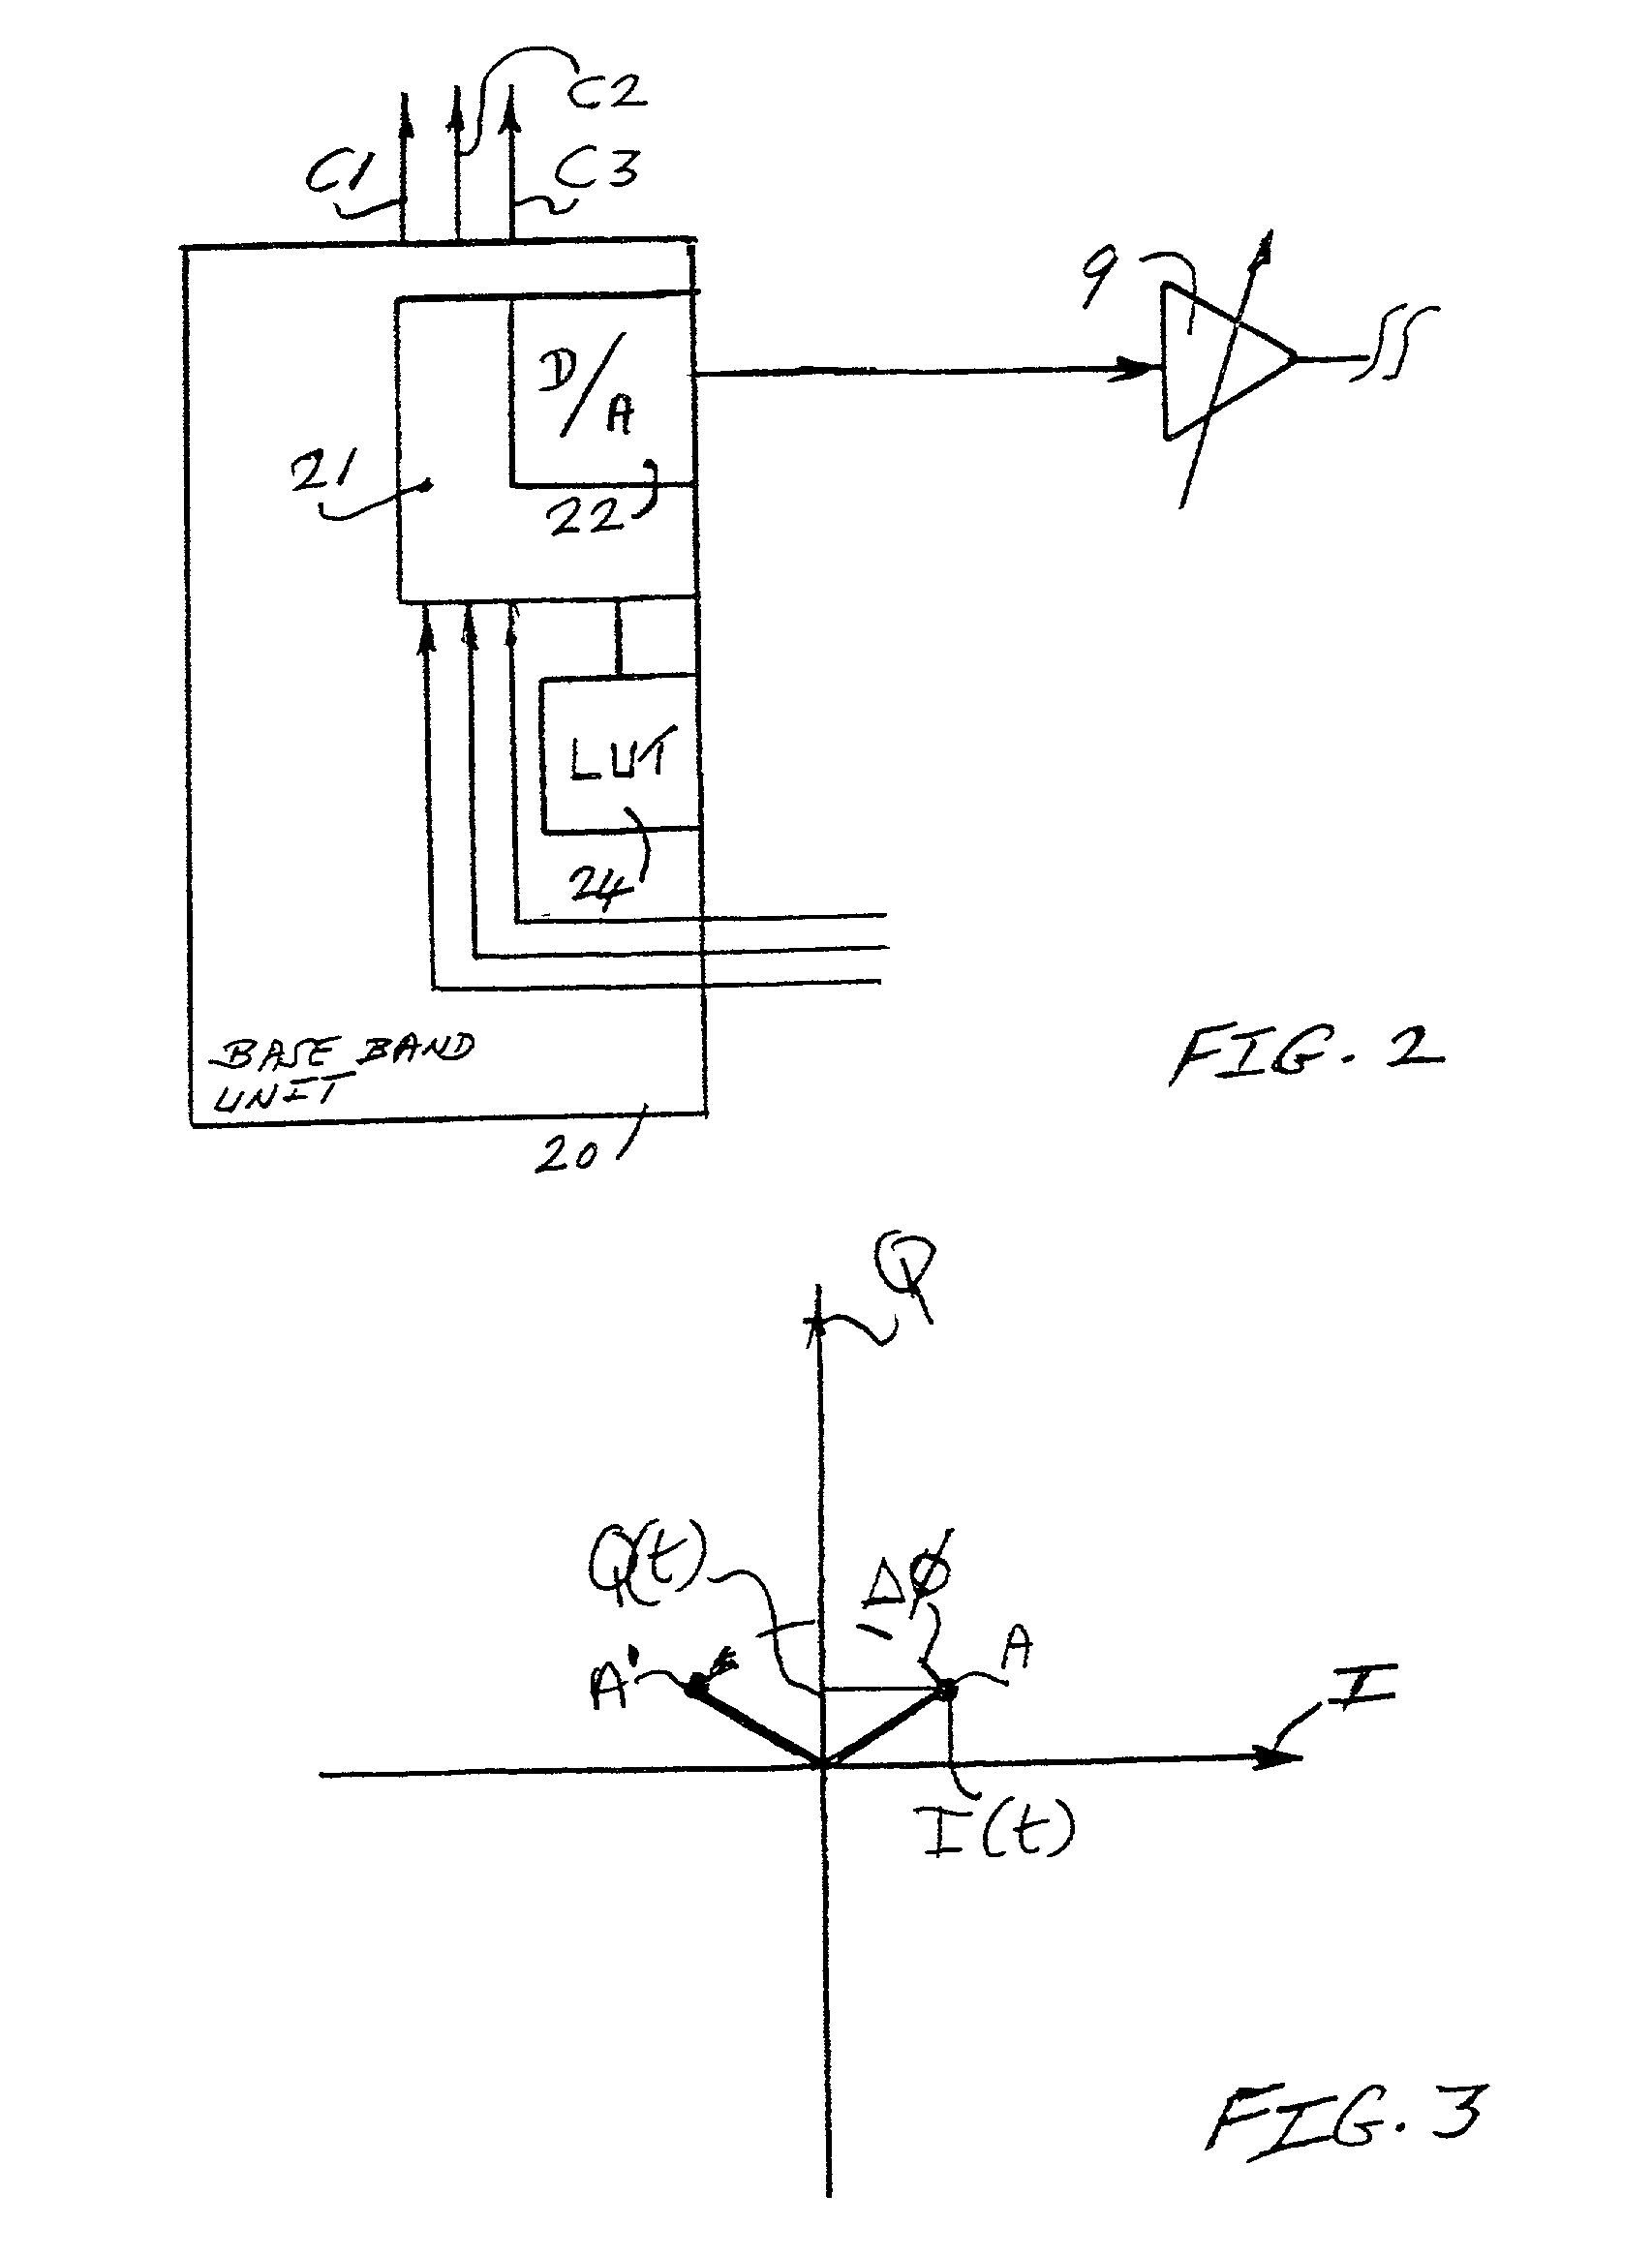 Transmitter with transmitter chain phase adjustment on the basis of pre-stored phase information